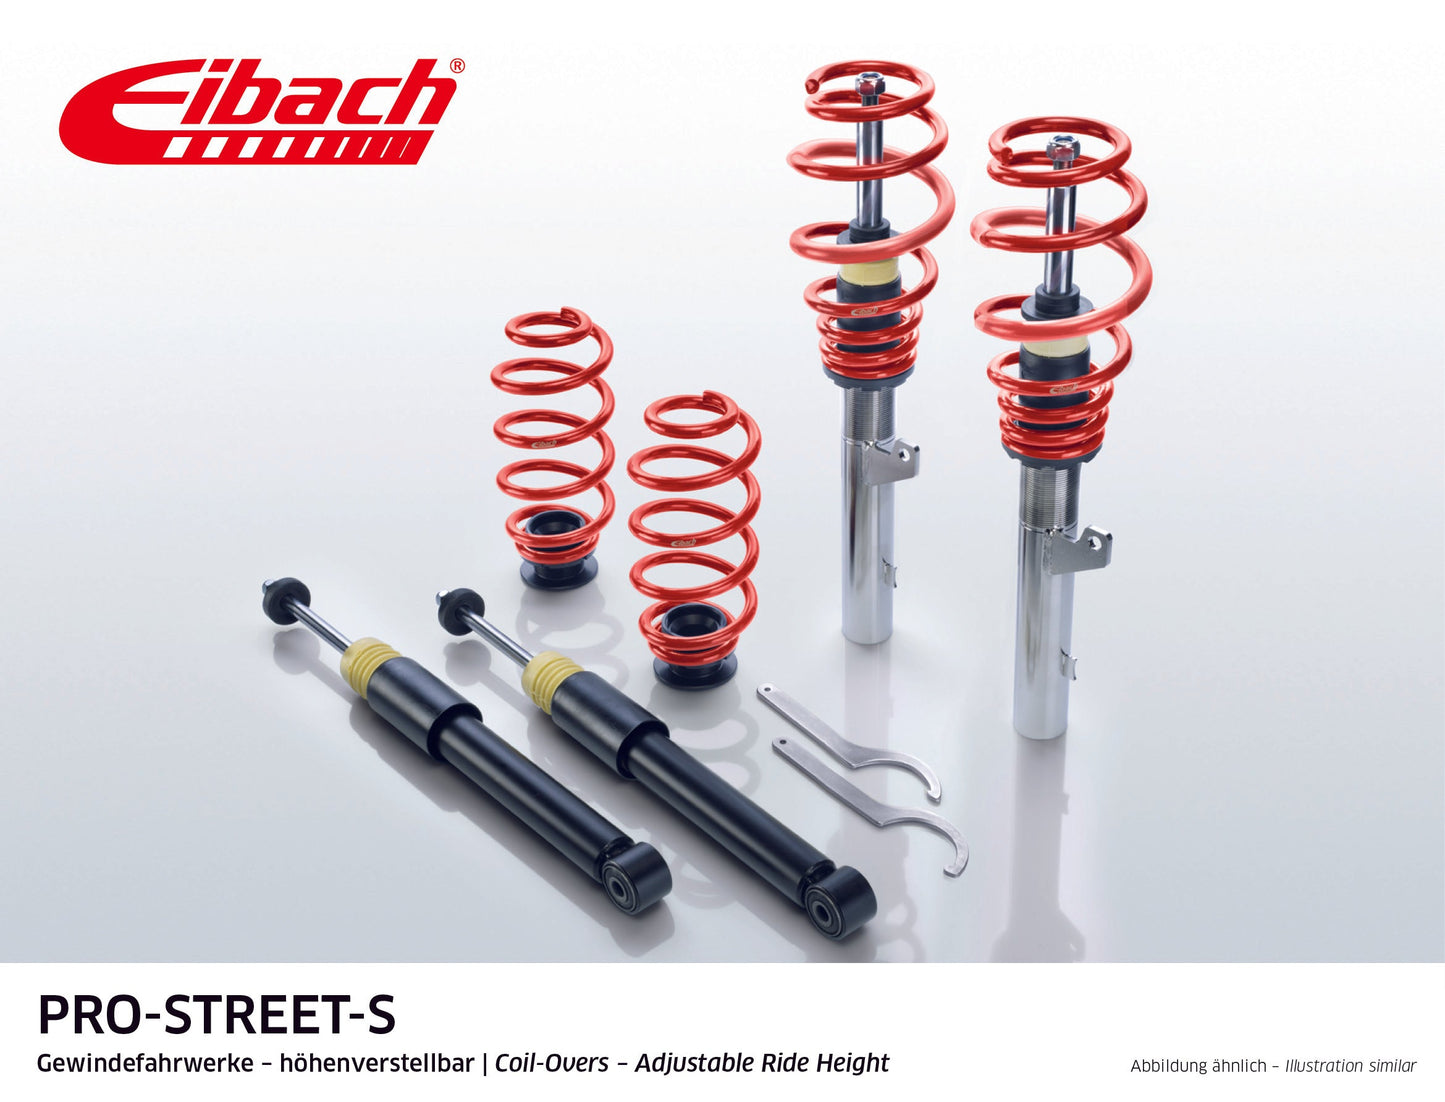 Eibach Pro-Street Coilover (PSS65-15-021-05-22) at £1177.12